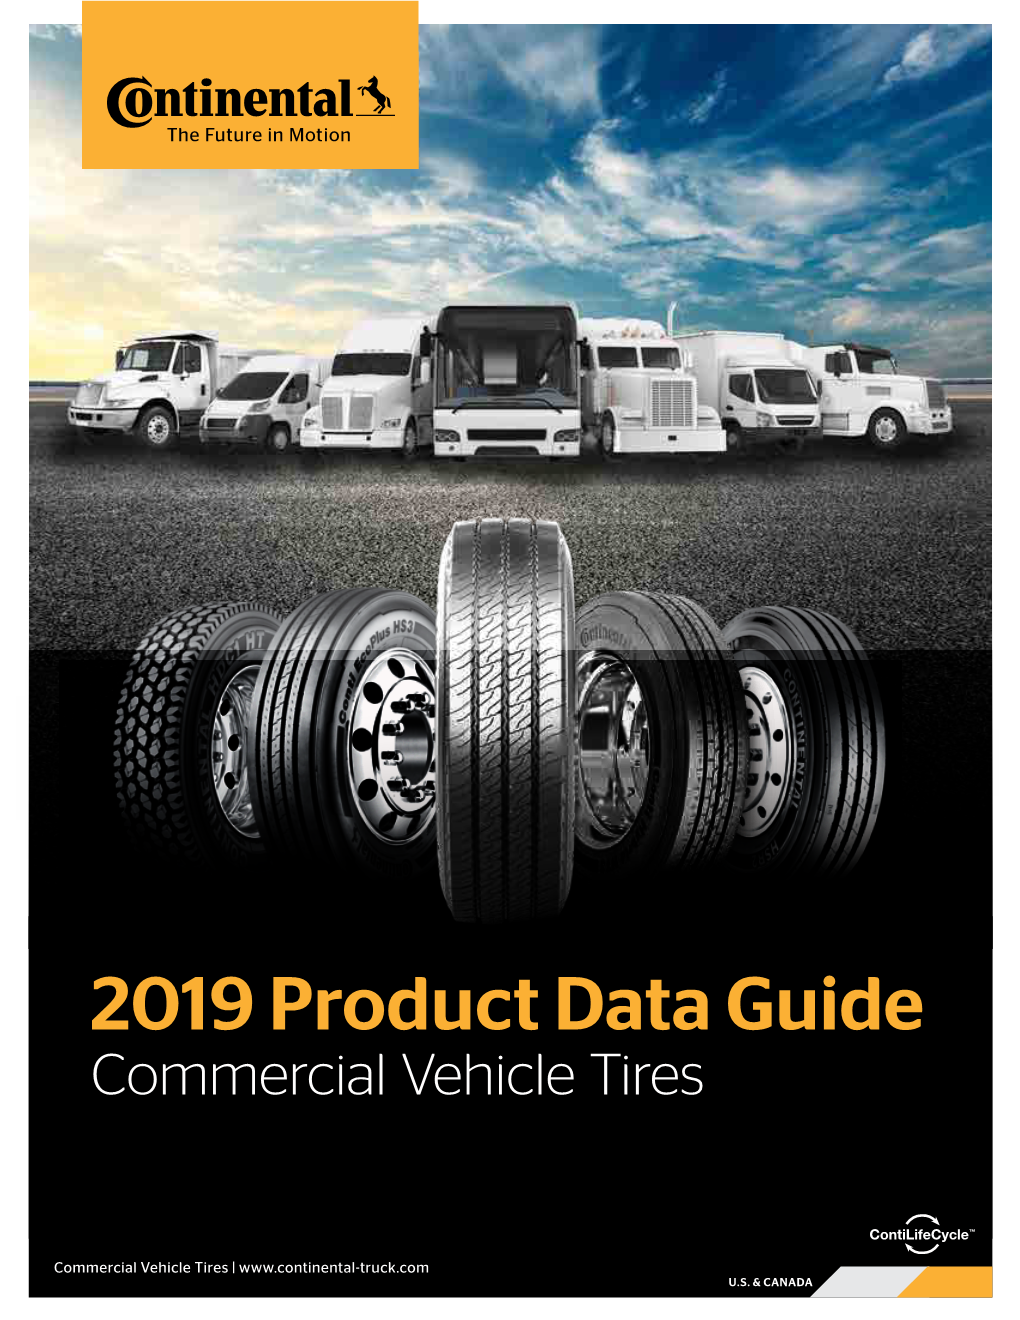 2019 Product Data Guide Commercial Vehicle Tires